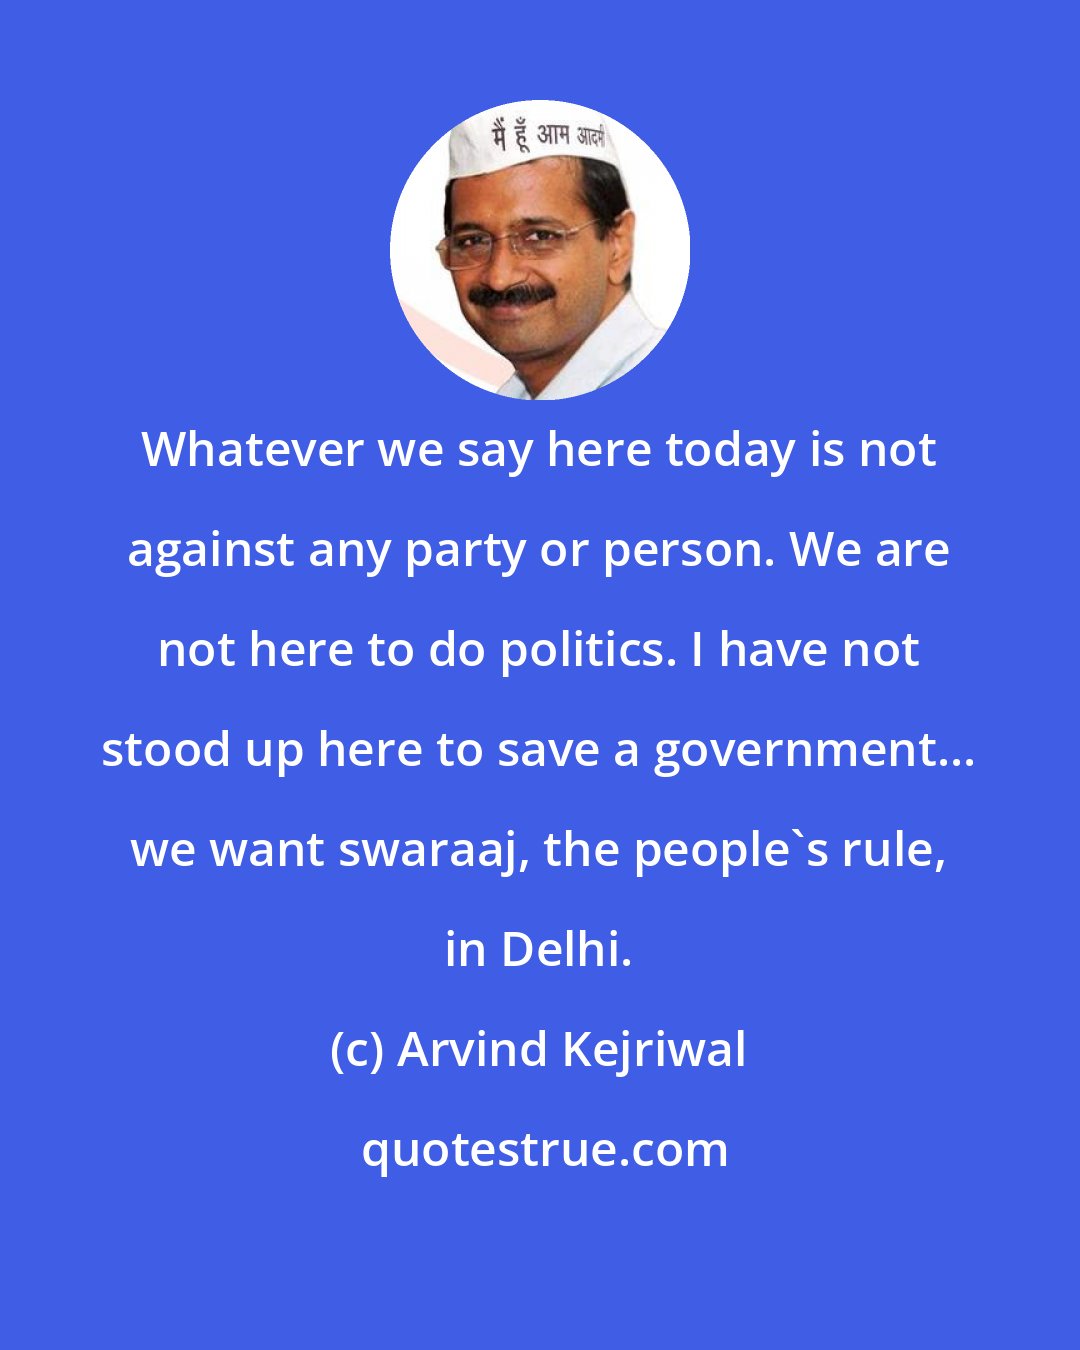 Arvind Kejriwal: Whatever we say here today is not against any party or person. We are not here to do politics. I have not stood up here to save a government... we want swaraaj, the people's rule, in Delhi.